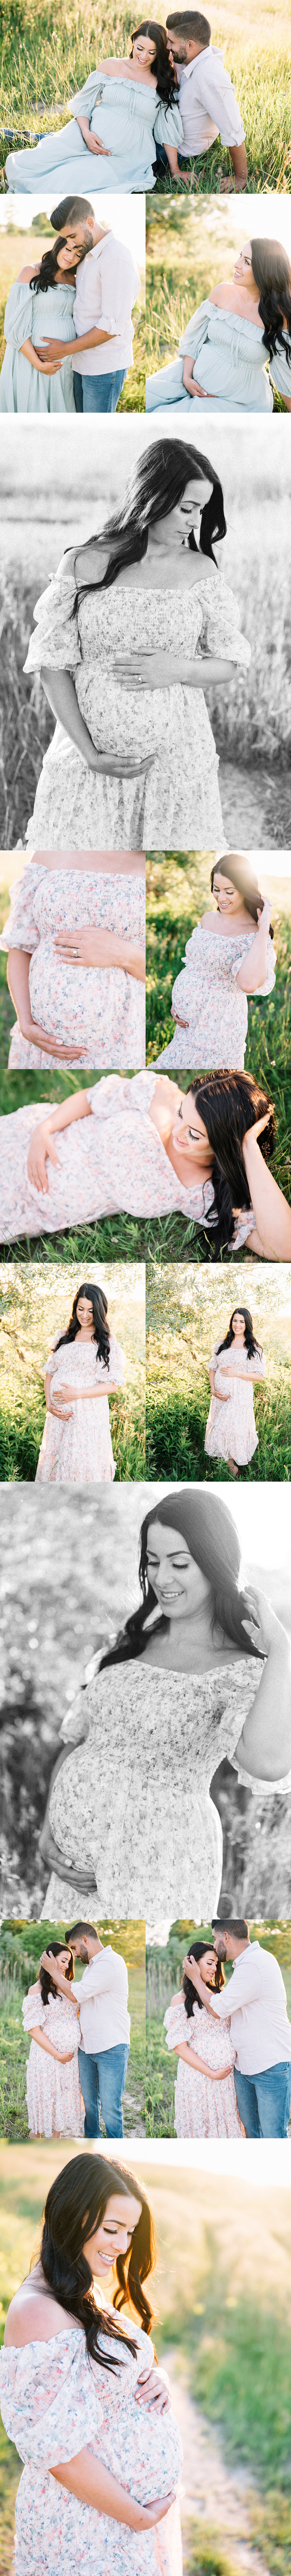 maternity portraits by the lake